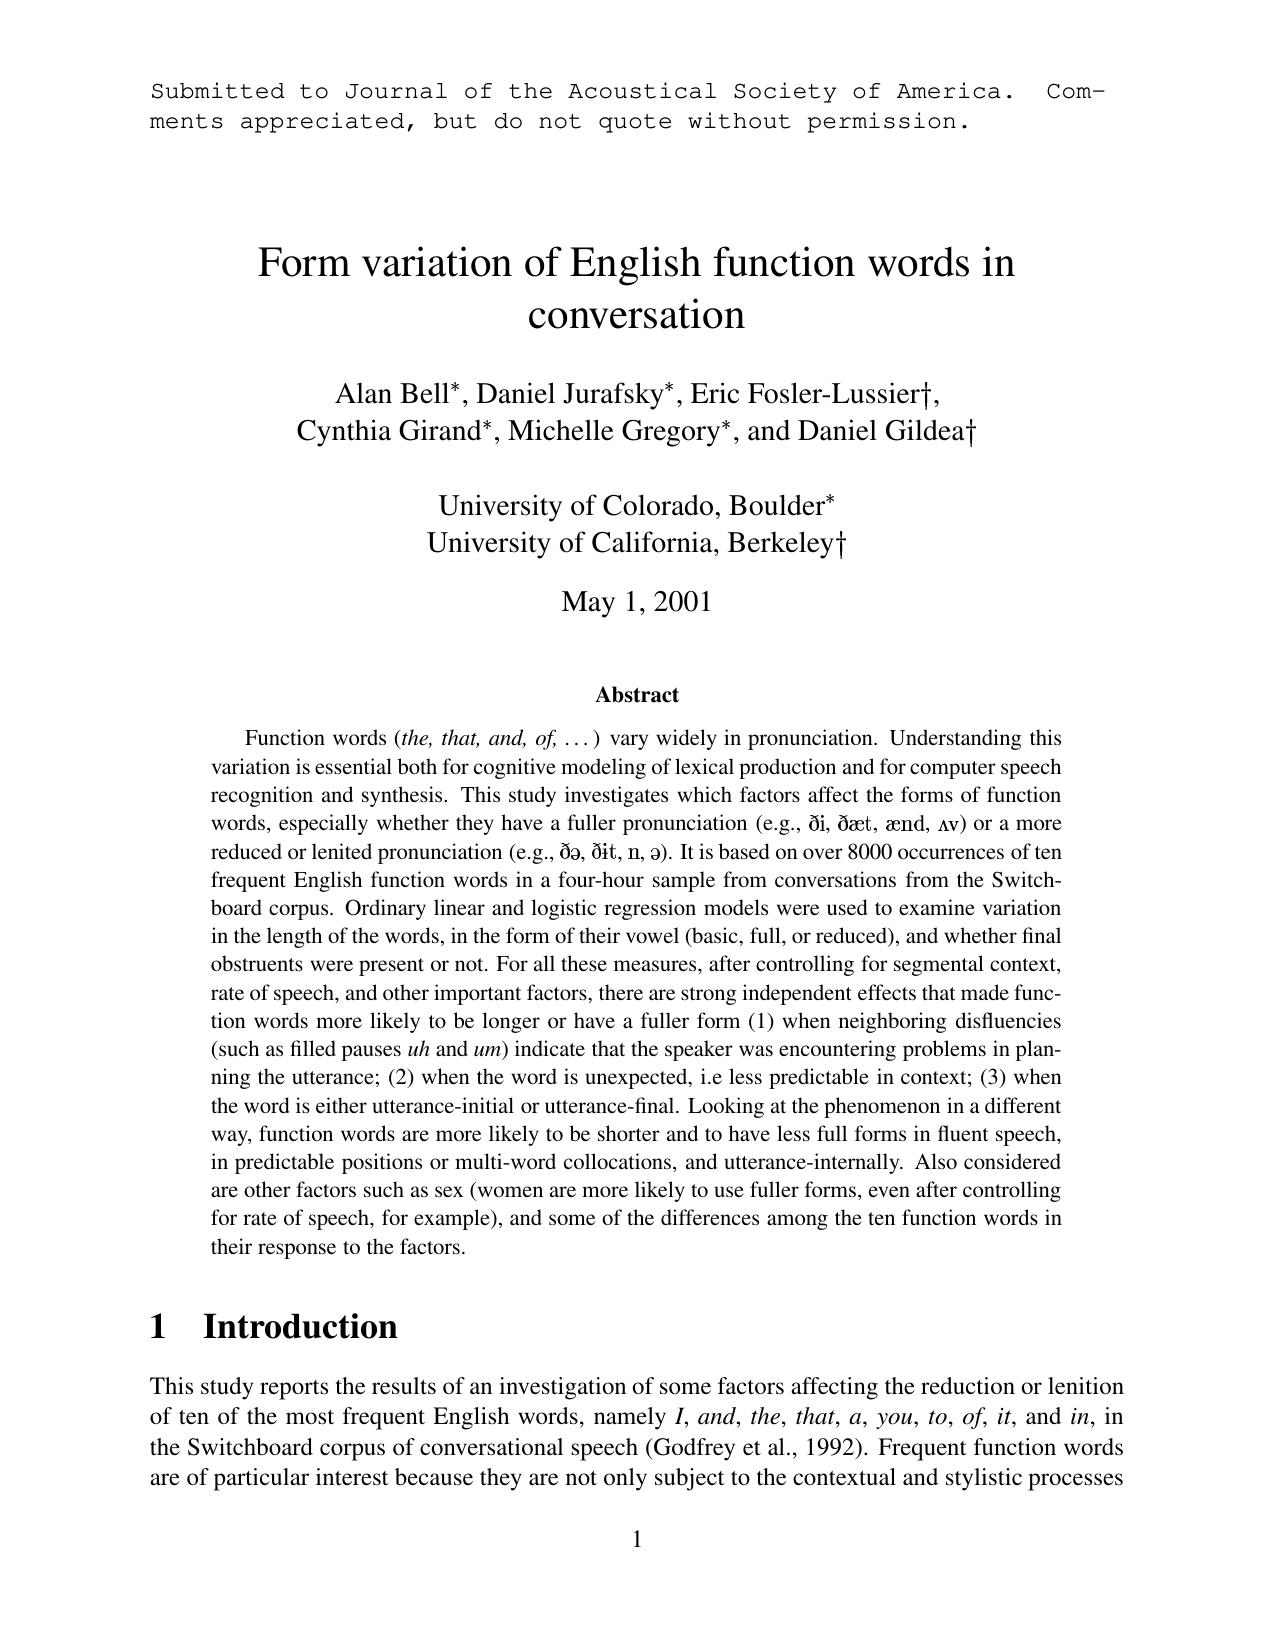 Form variation of English function words in conversation - Paper